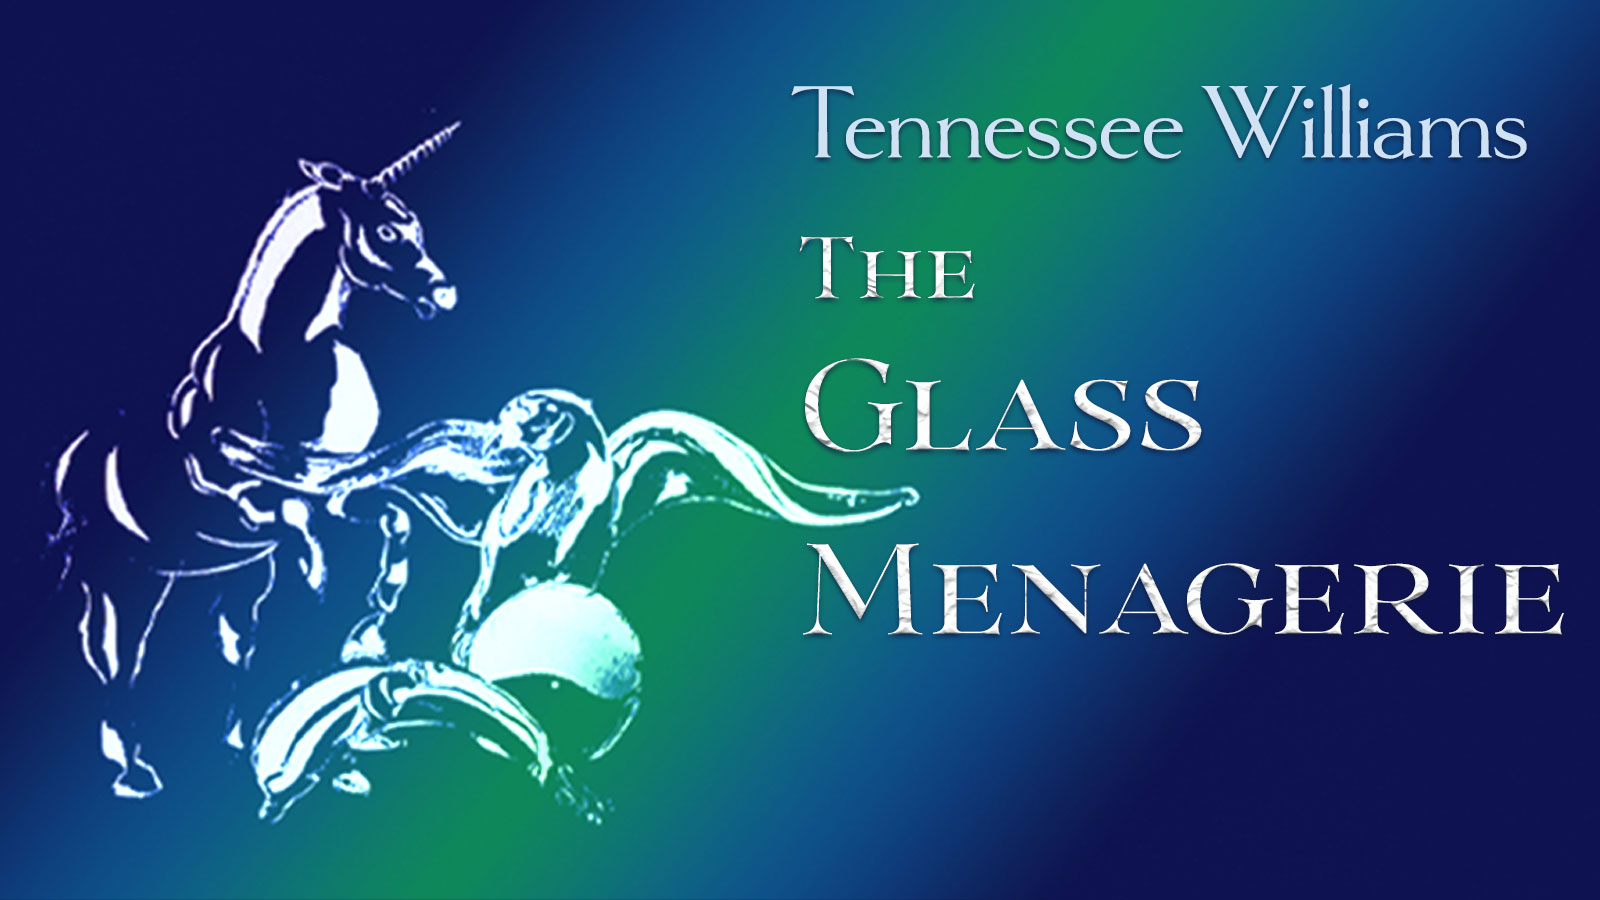 illustration of a glass unicorn, seal, dolphin and ball with text "Tennessee Williams THE GLASS MENAGERIE"